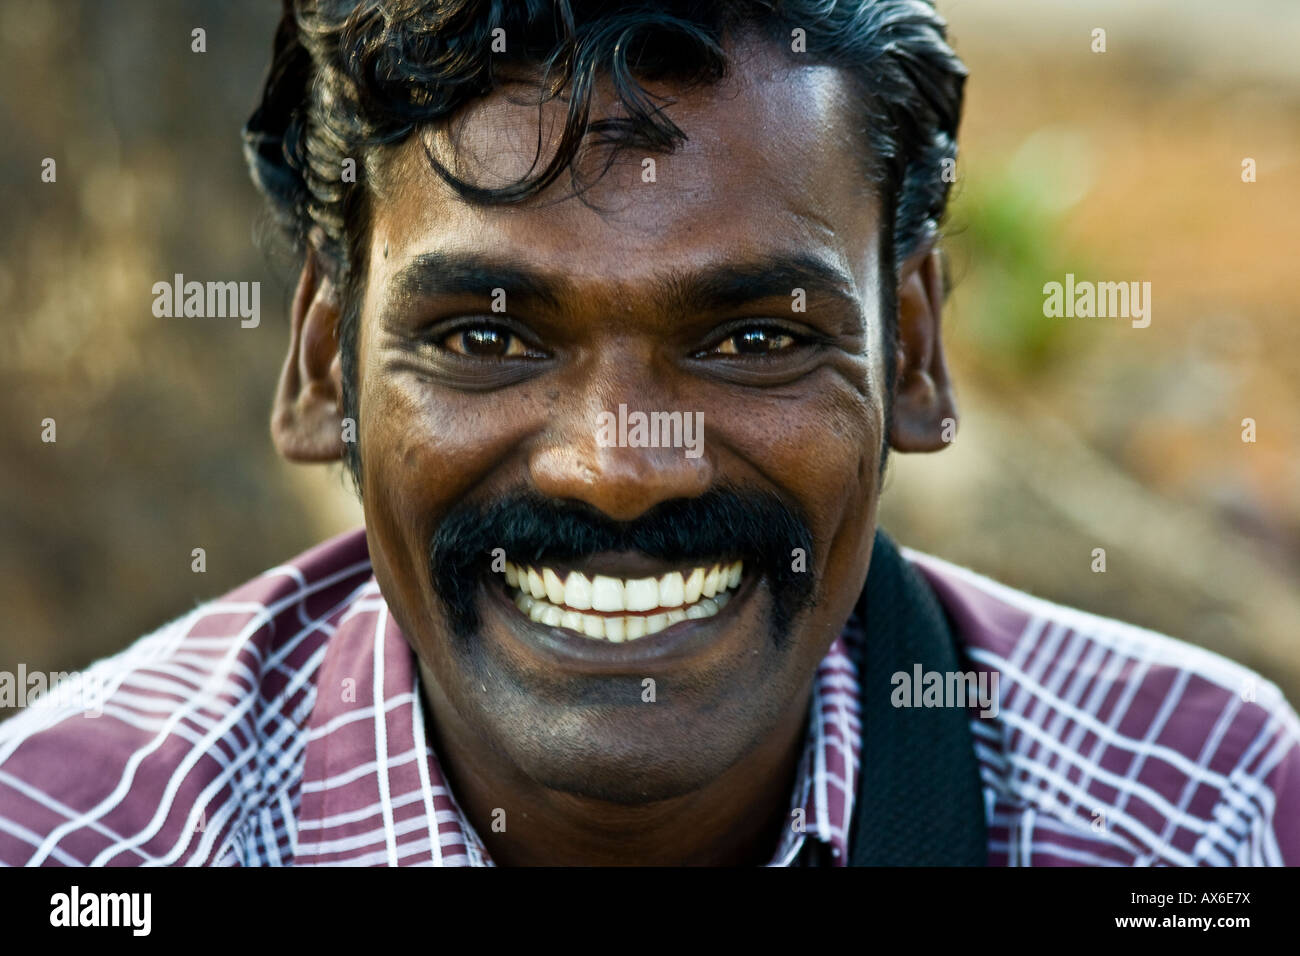 indian-man-with-a-big-smile-in-cochin-india-ax6e7x.jpg